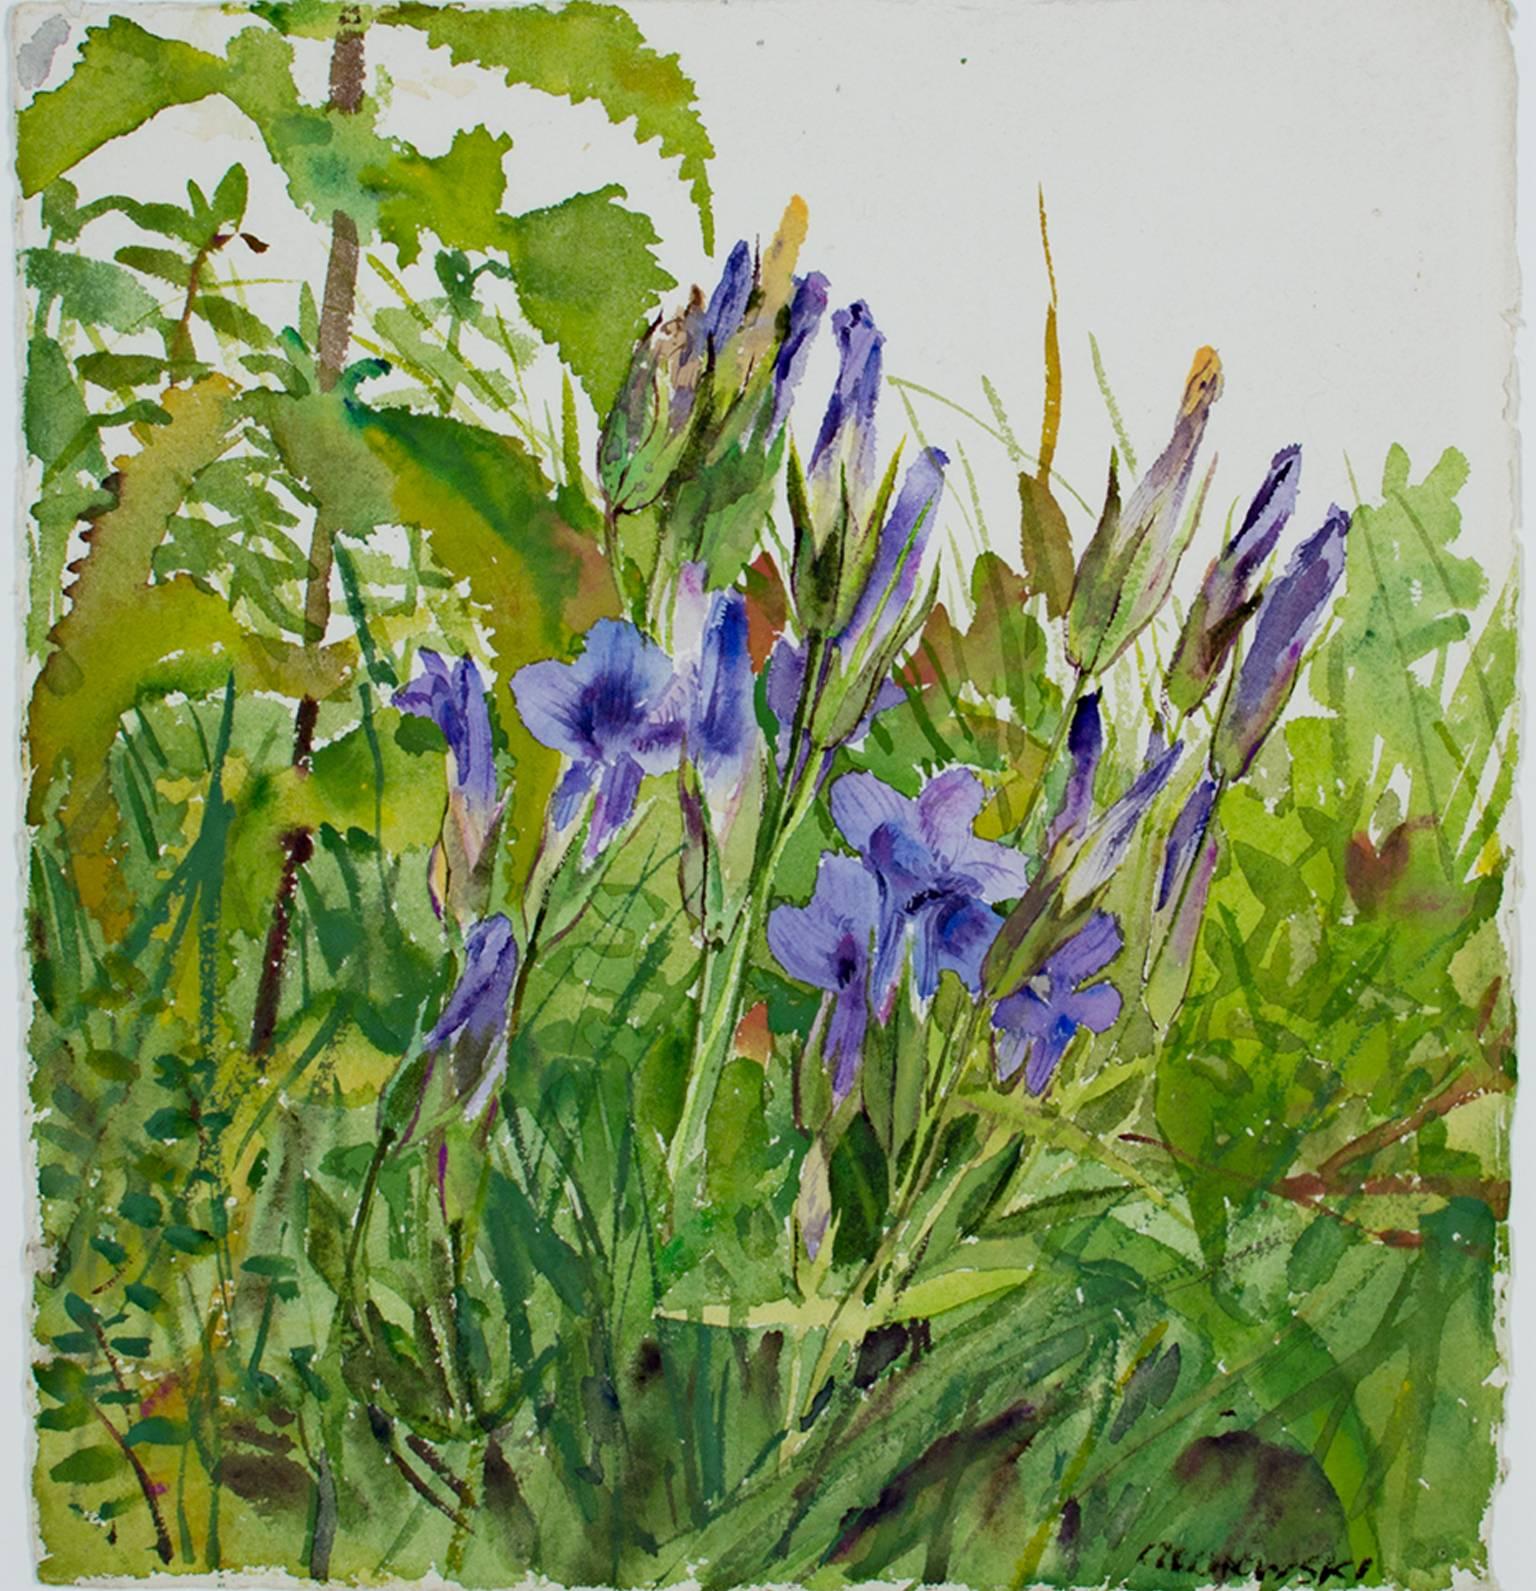 "Fringed Gentians," Original Watercolor of Flowers signed by Alicia Czechowski